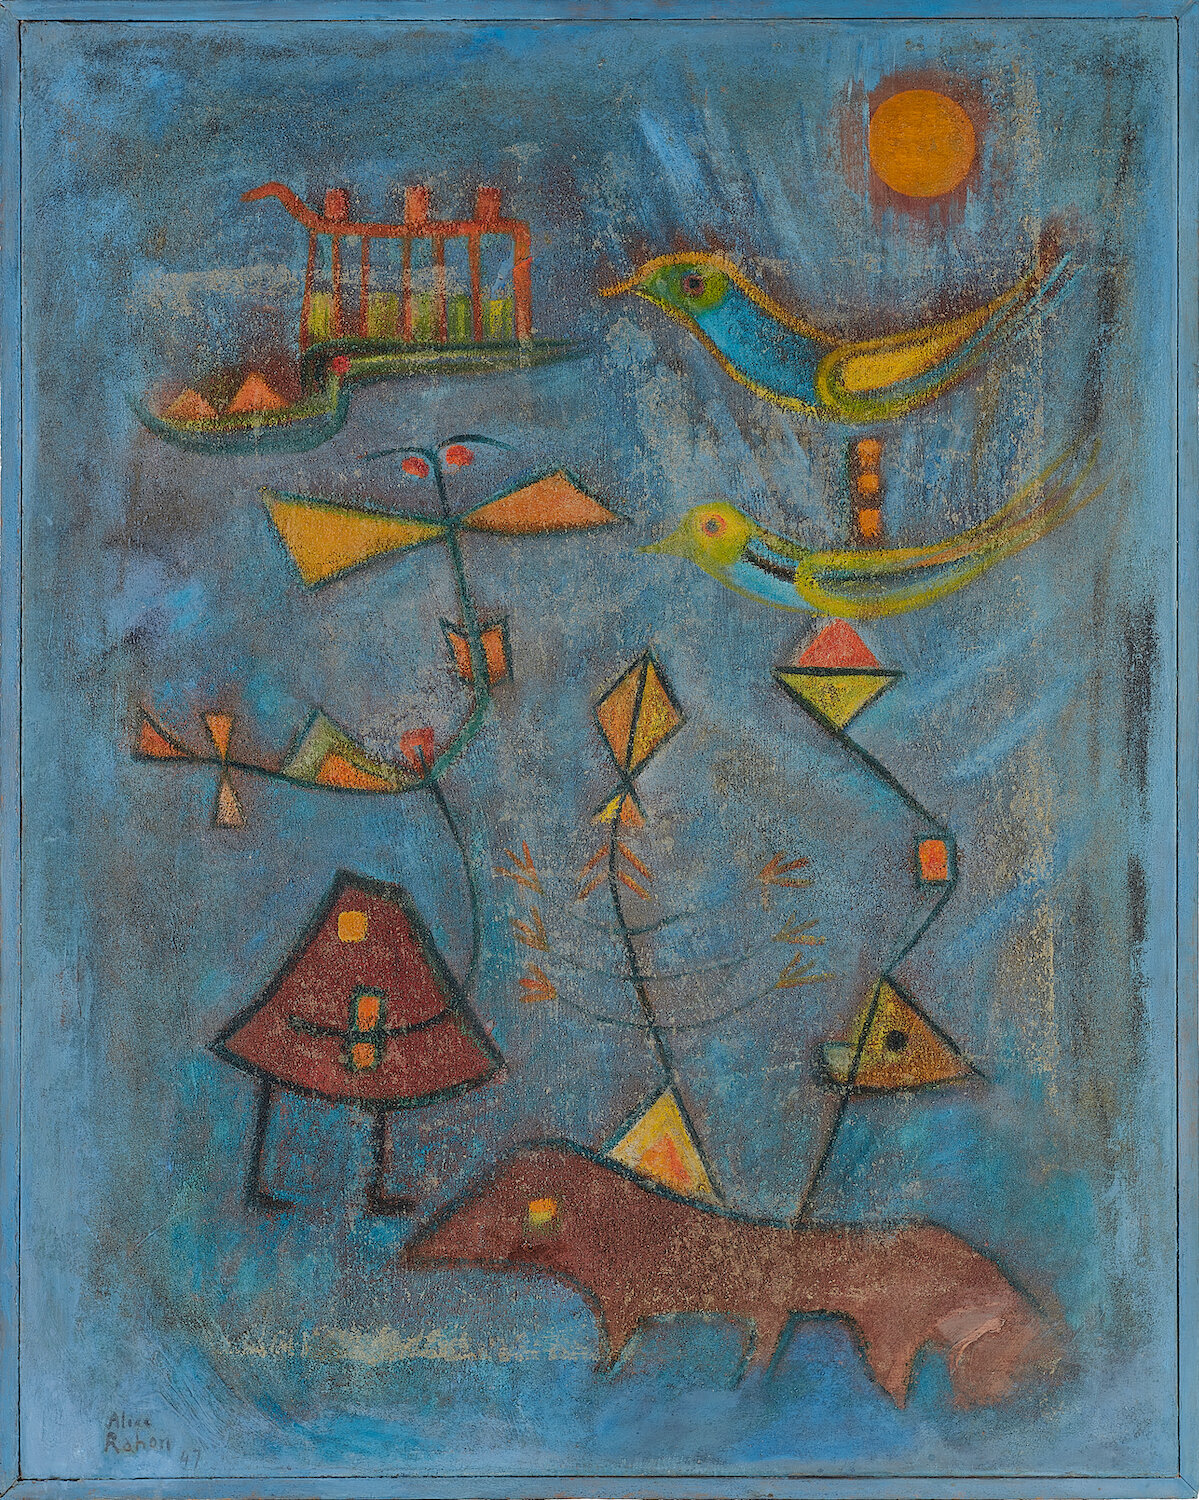  Alice Rahon,  Painting for a Little Ghost Who Couldn’t Learn to Read , 1947, oil and sand on canvas, 35 1/4 x 28 13/16 inches (89.5 x 73.2 cm) 